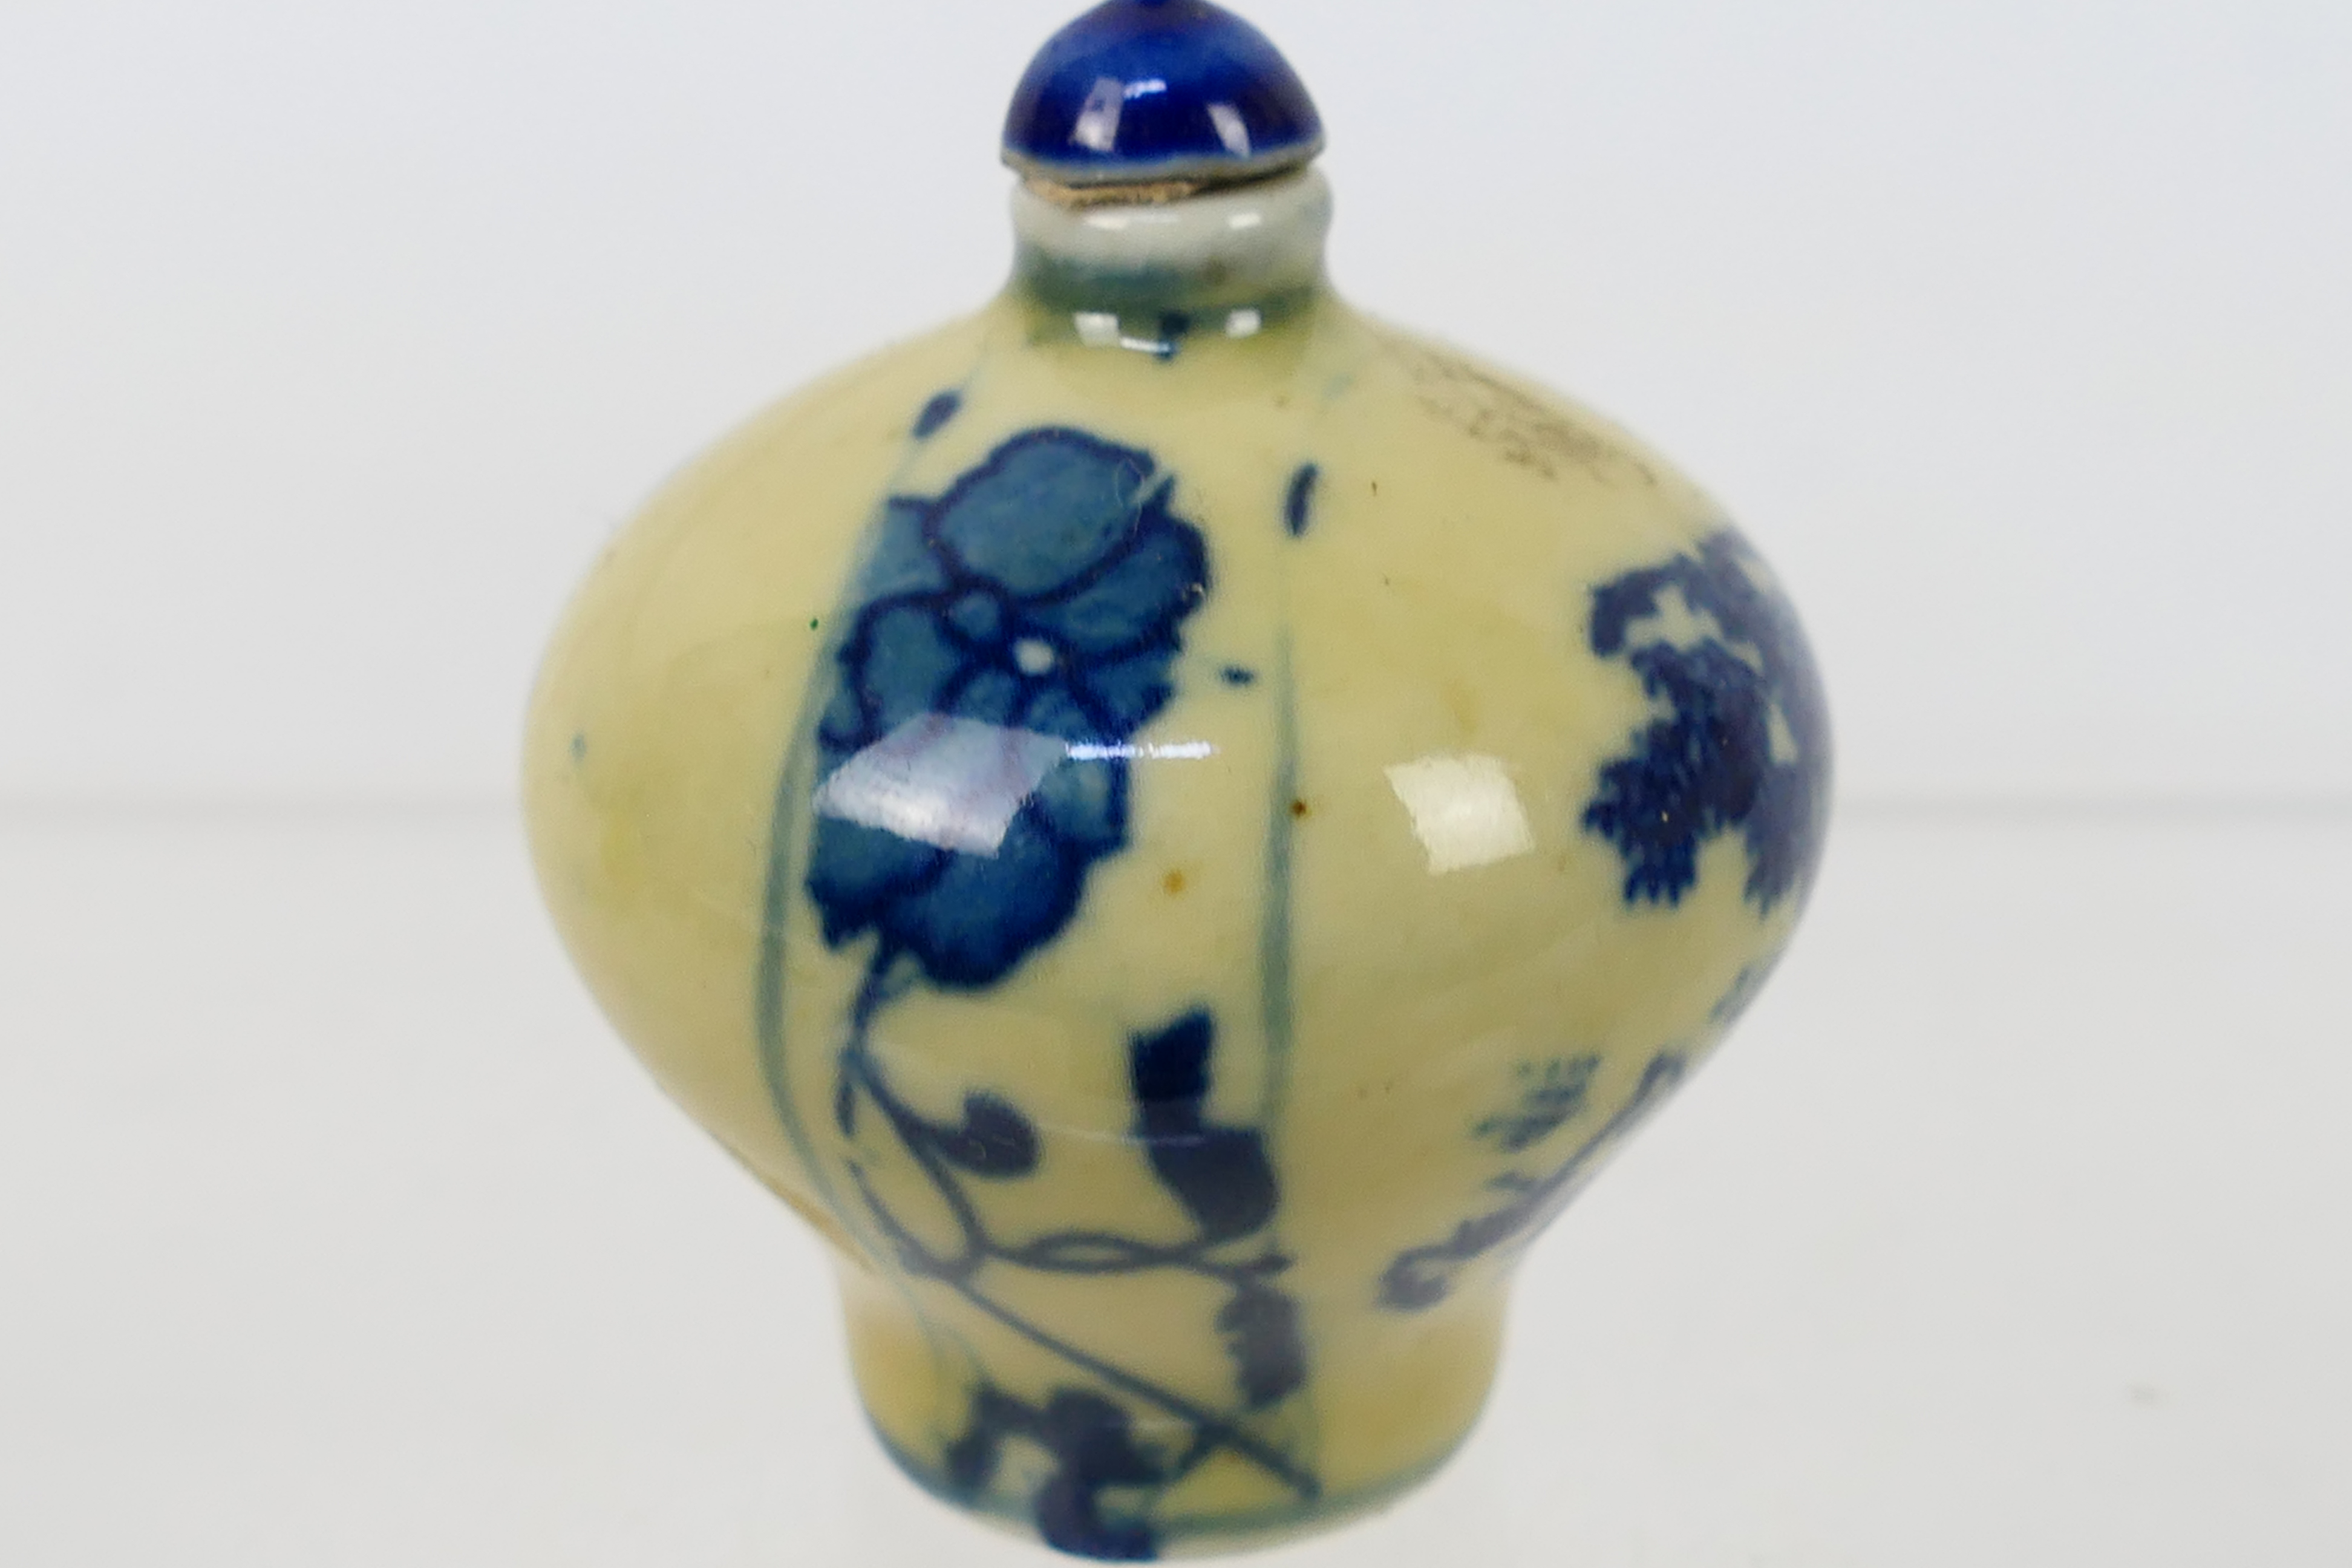 Lot to include snuff bottles, glass and ceramic examples, carved stone items and other. - Image 22 of 23